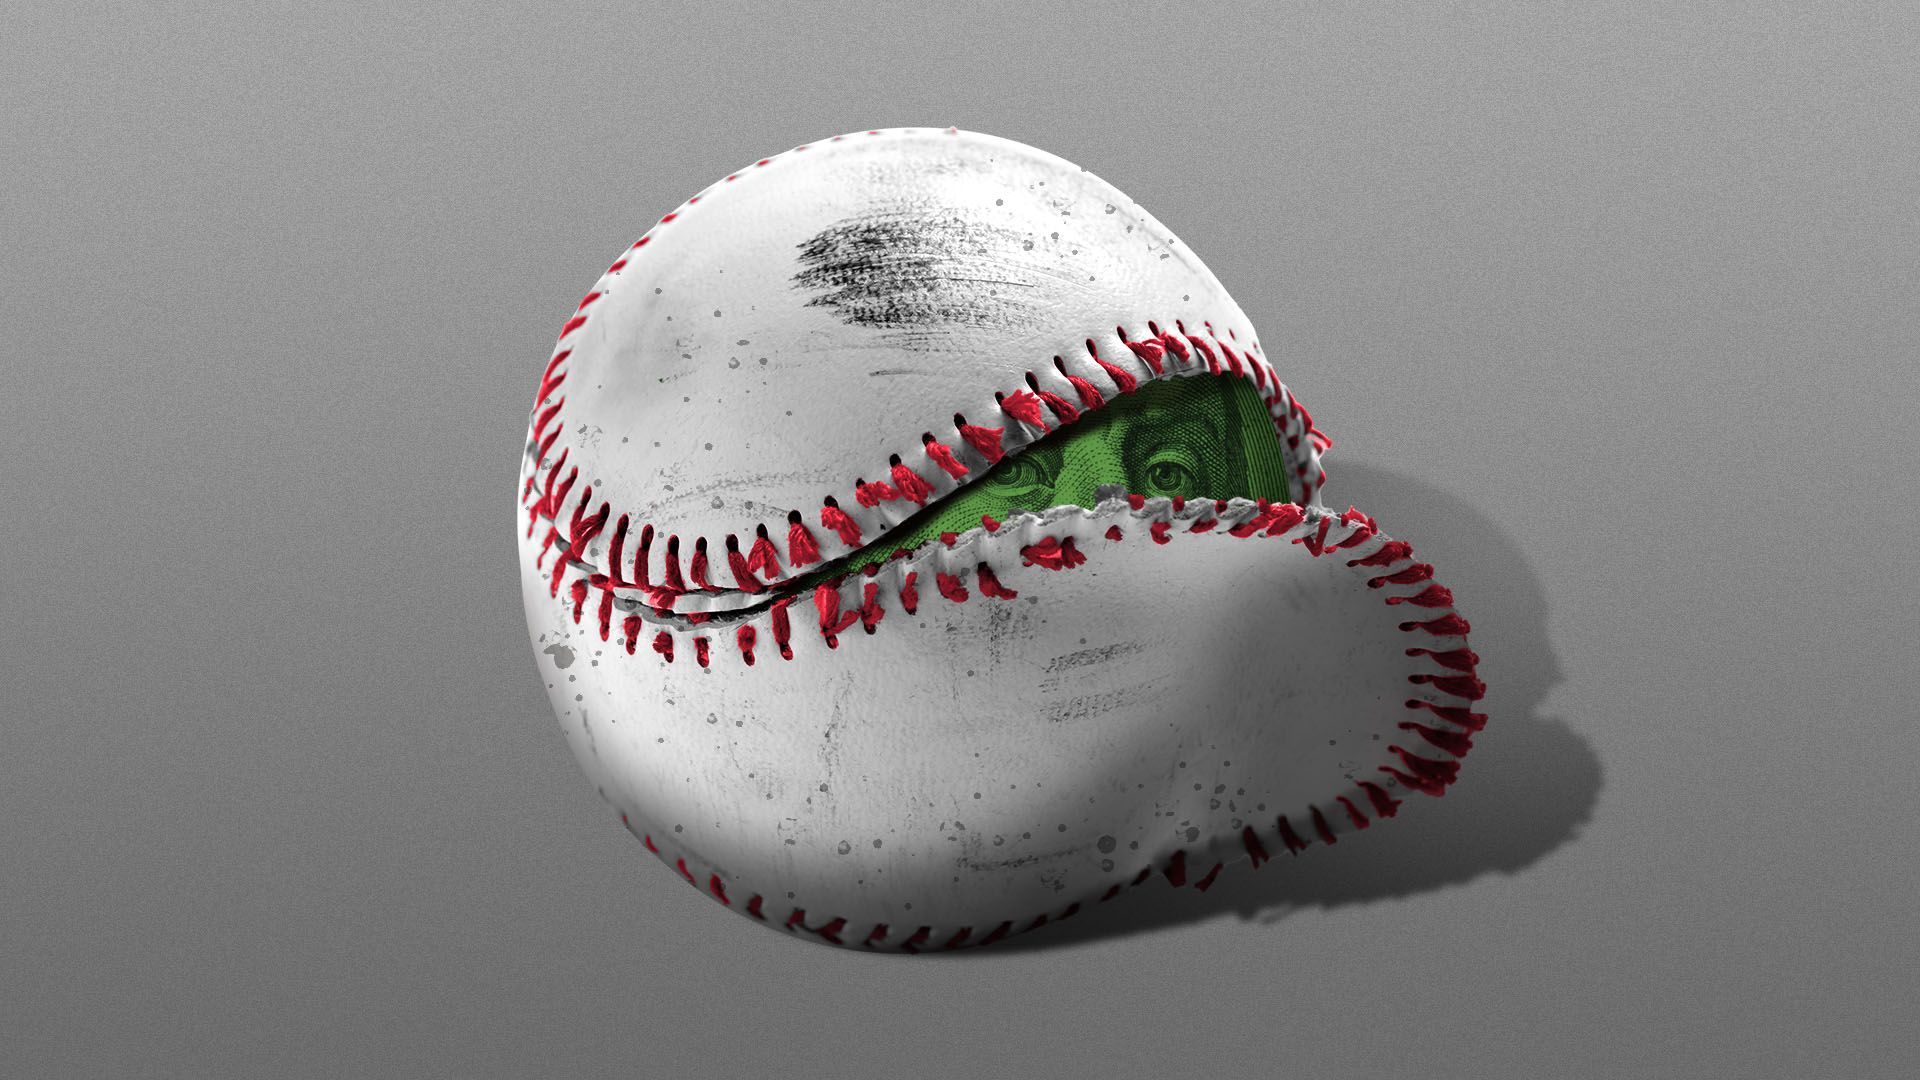 Illustration of a baseball with the stitching coming apart revealing a dollar bill inside